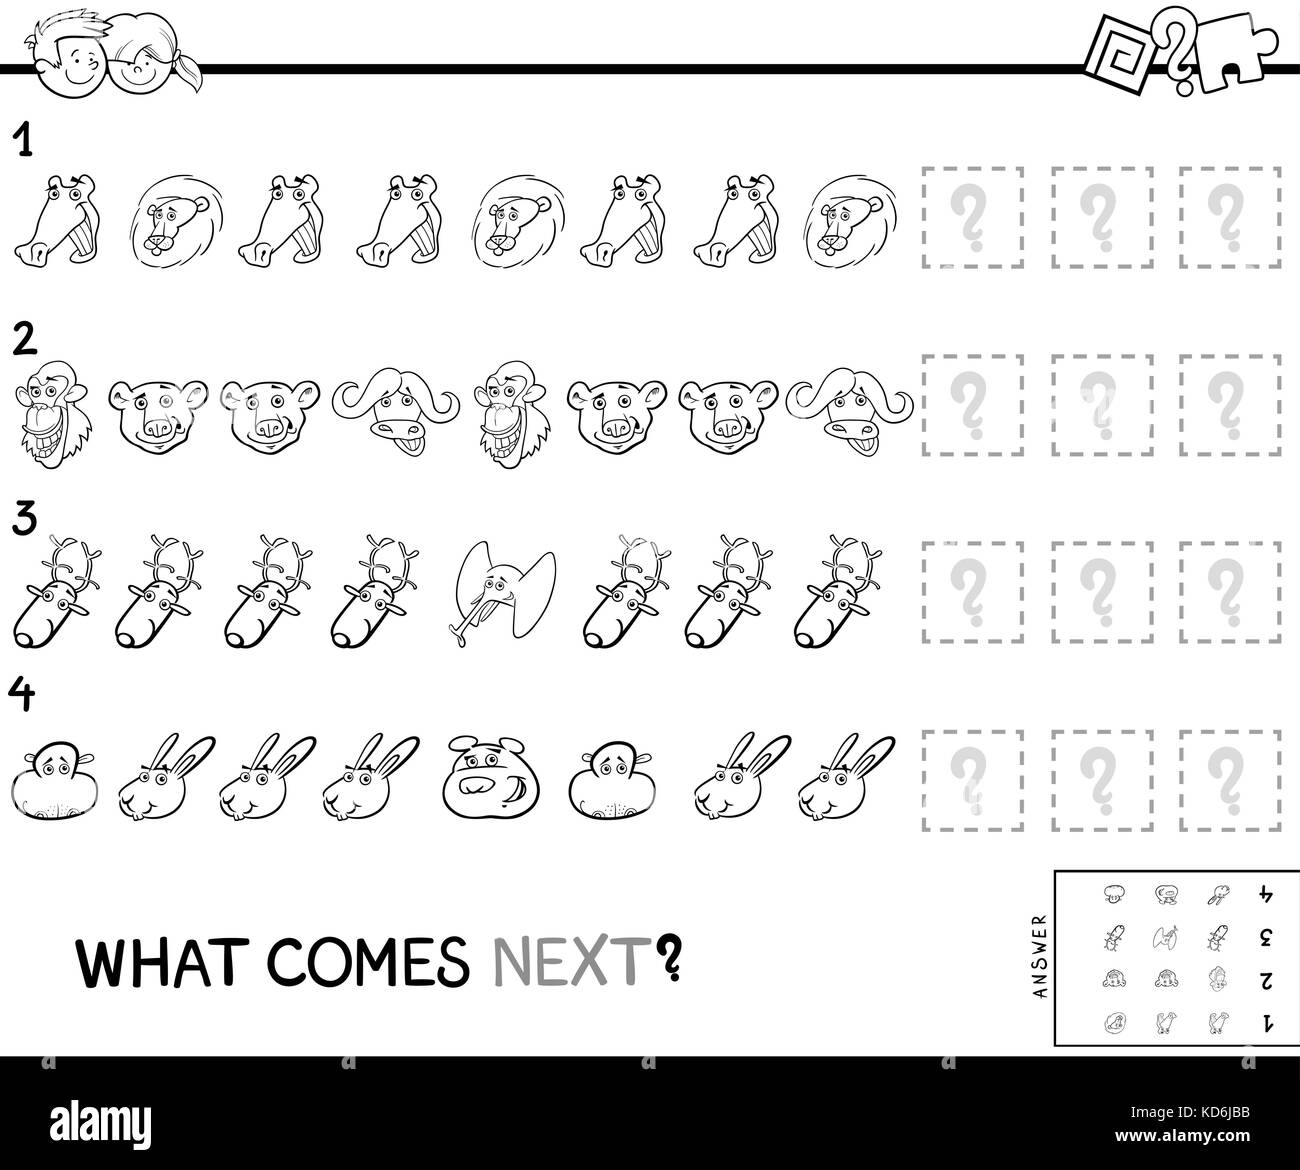 Black and White Cartoon Illustration of Completing the Pattern Educational Activity Game for Preschool Children with Animal Characters Coloring Book Stock Vector